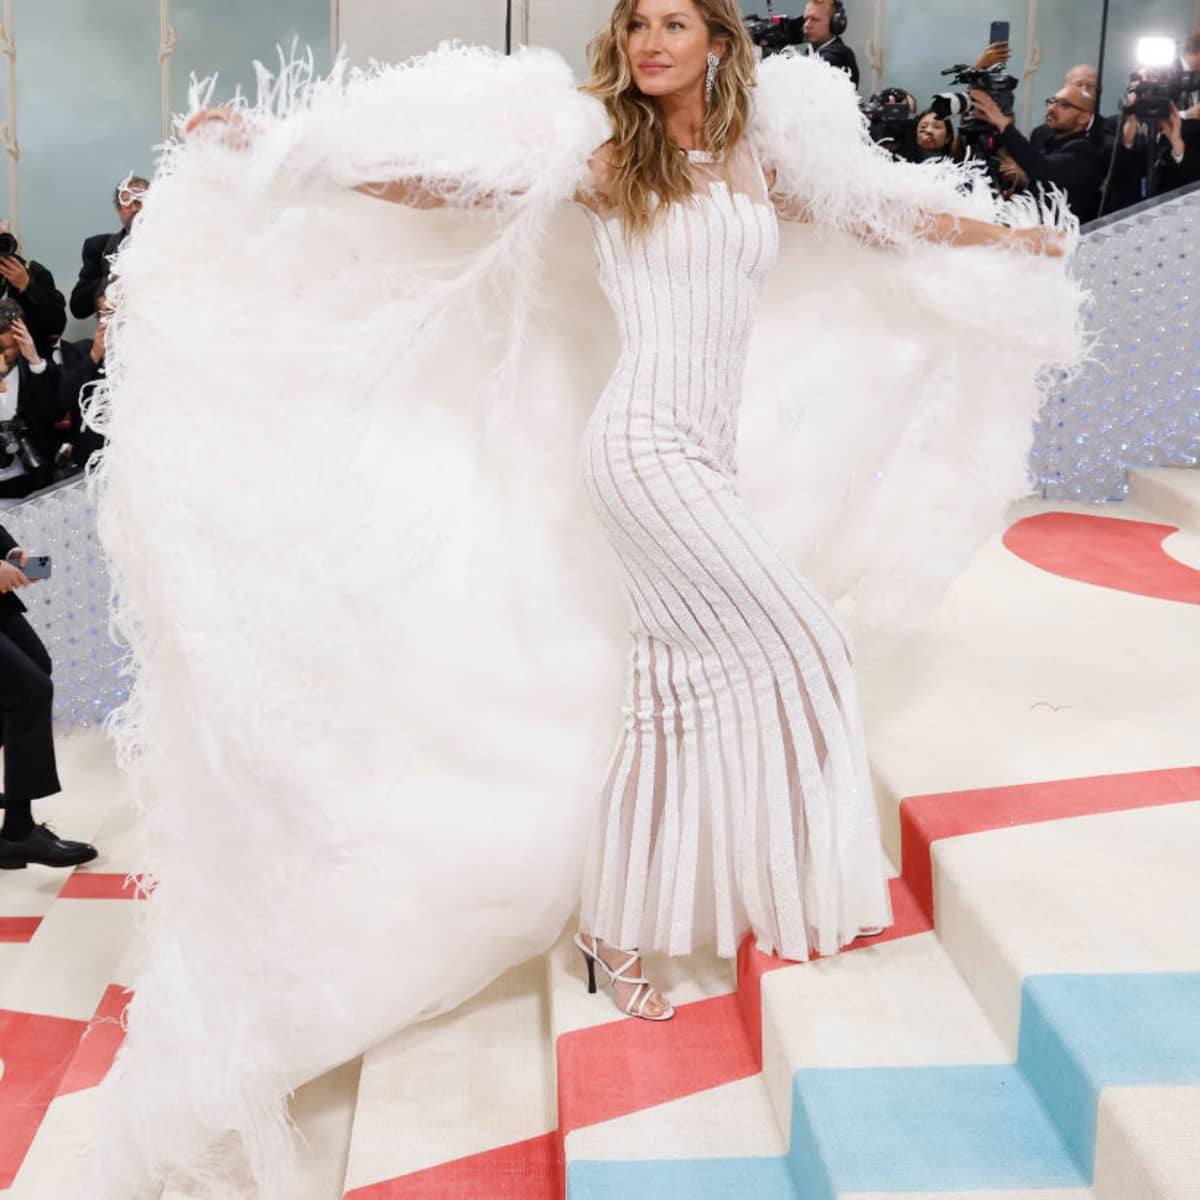 Vintage Chanel Looks Are Ruling The 2023 Met Gala Red Carpet